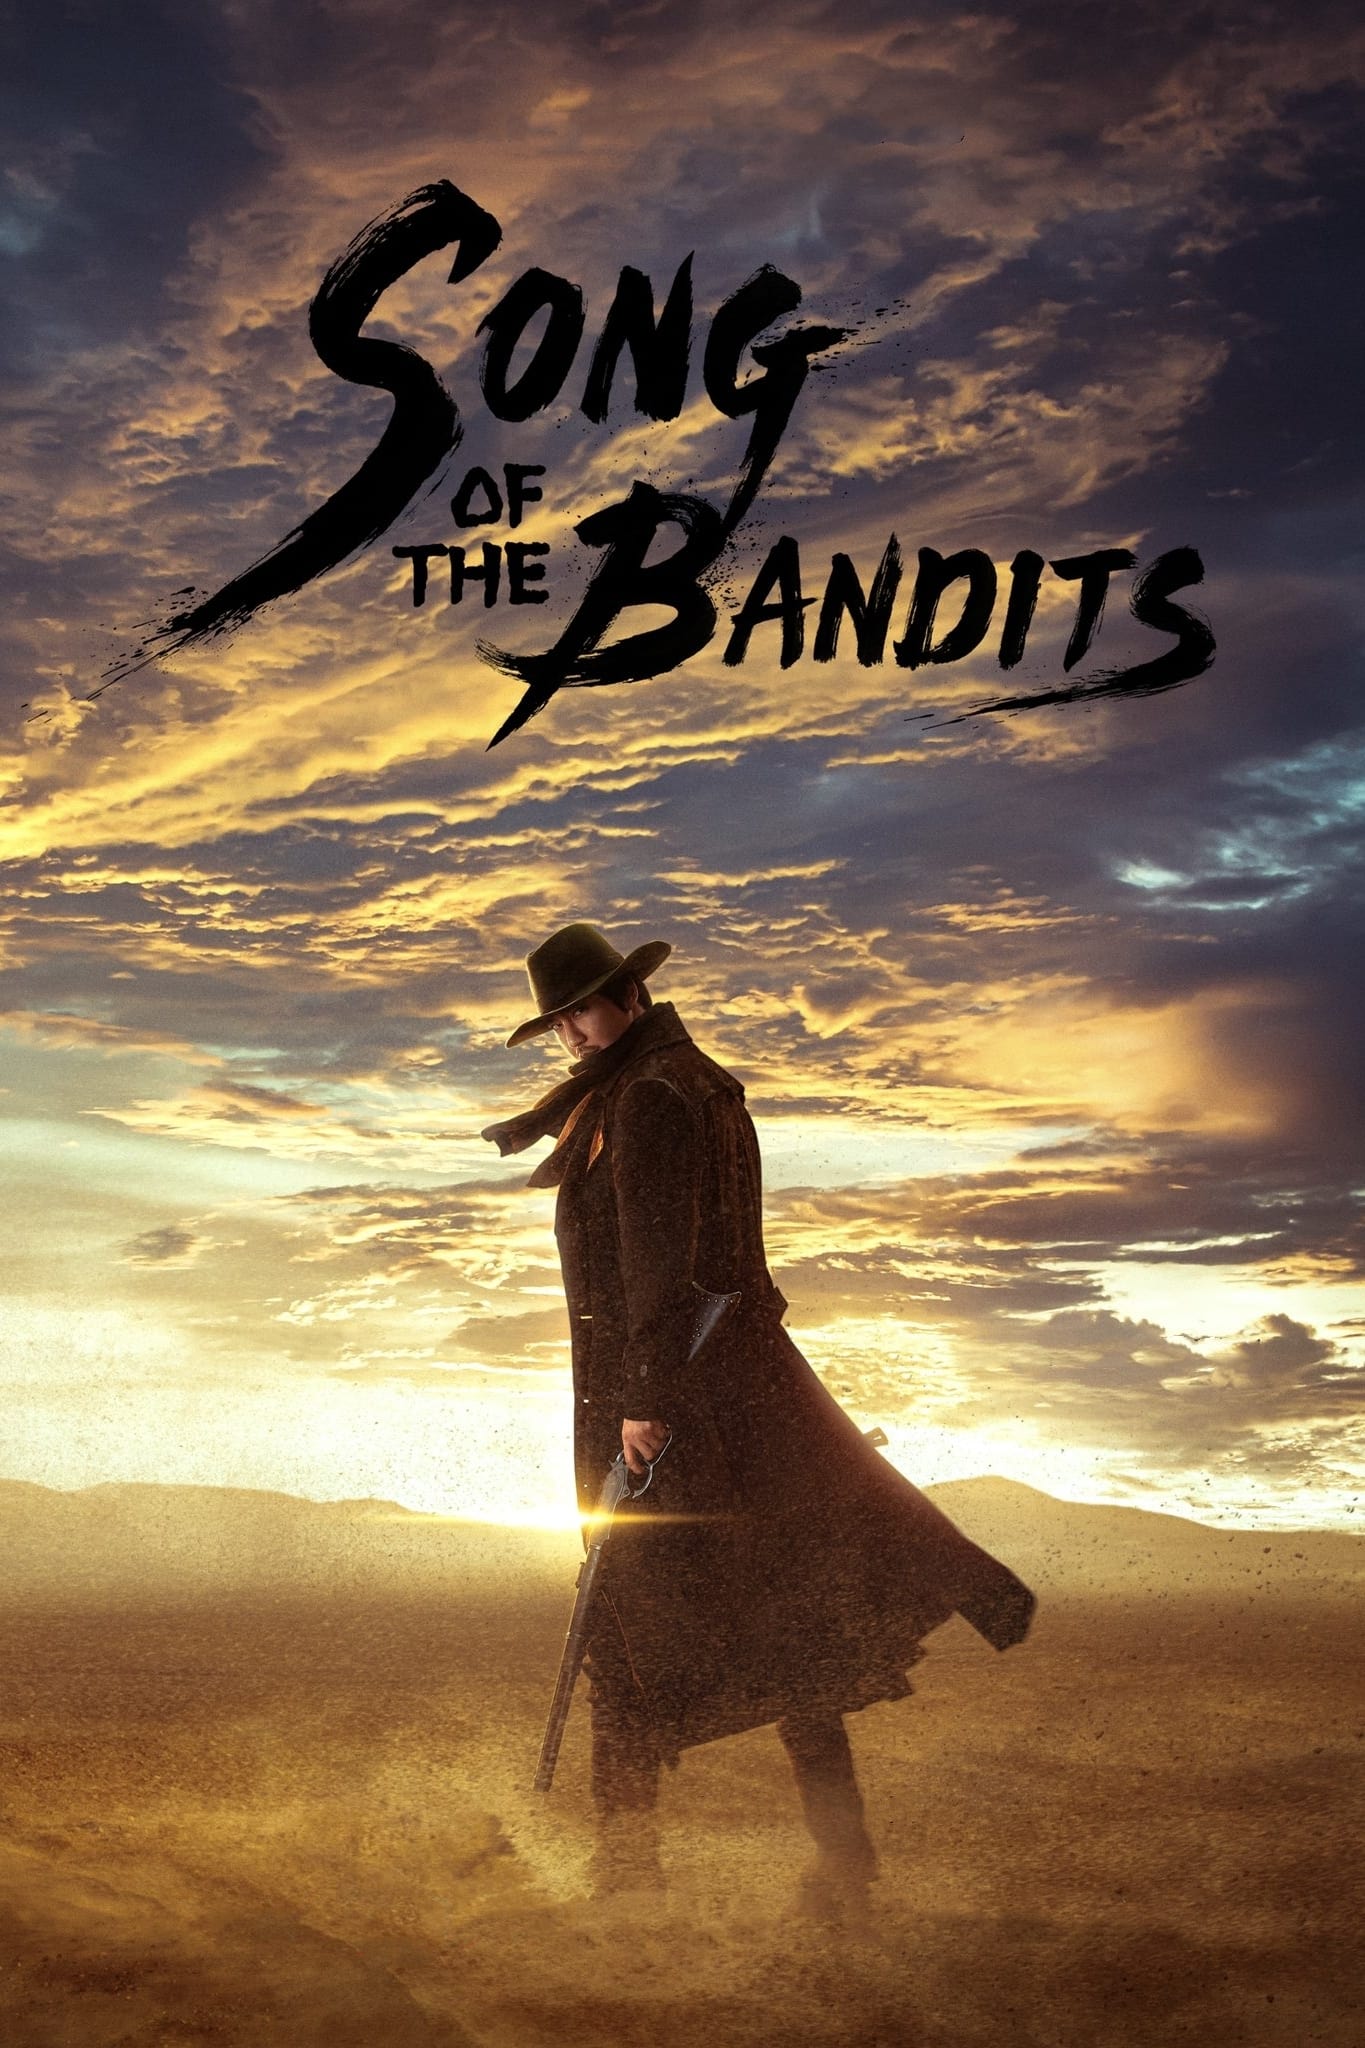 Film Song of the Bandits - Série TV 2023